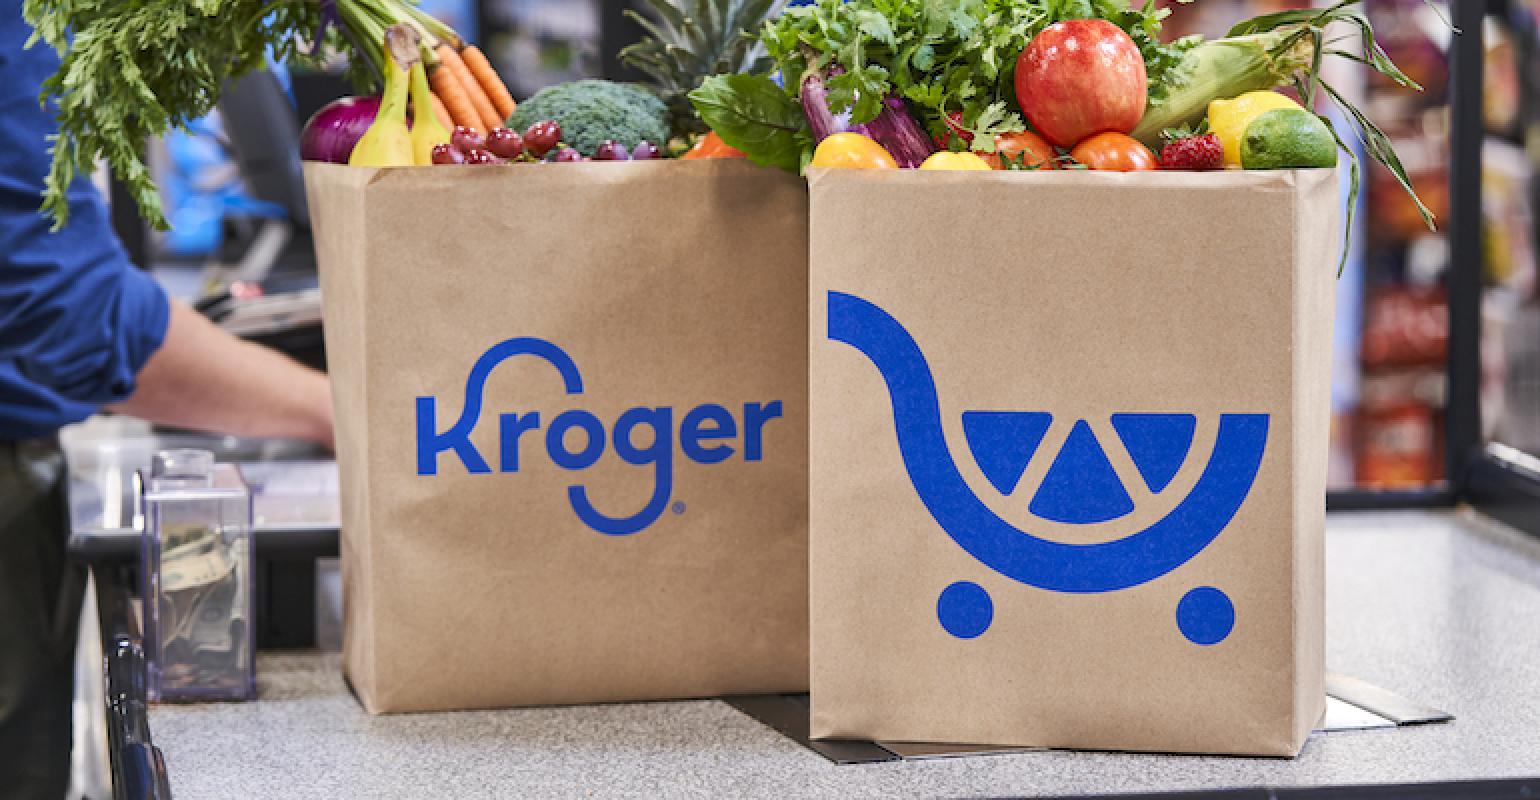 Kroger to Ditch Plastic Bags by 2025 - WSJ